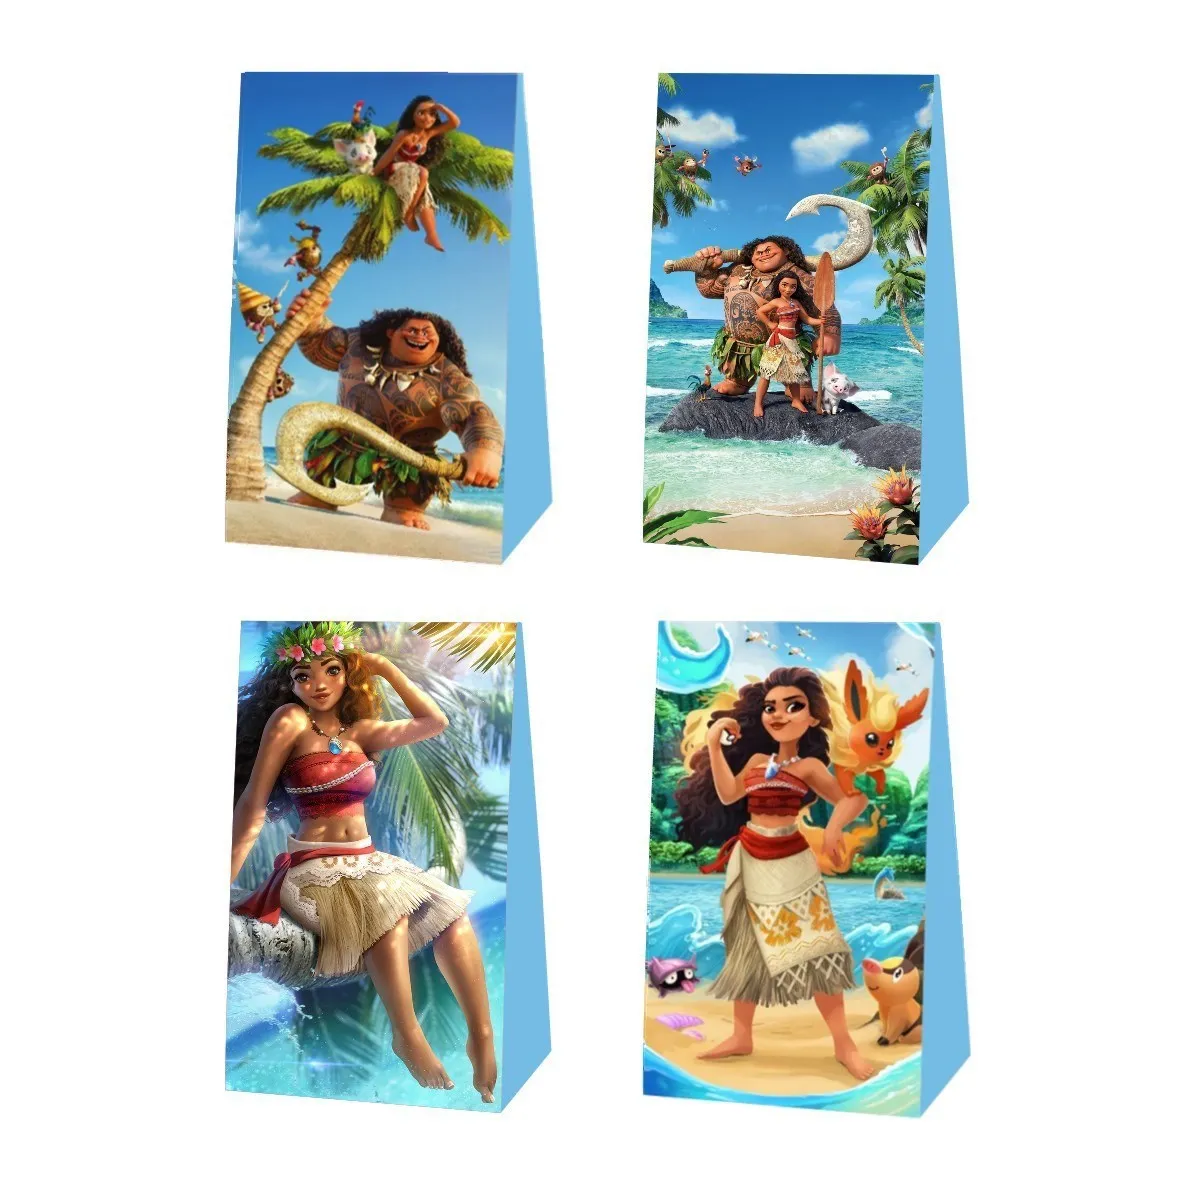 Moana Theme Cartoon Party Tableware Set Cup Balloon Plate Napkin Candy Box Banner Flag Kid's Birthday Party Decorations Supplies images - 6